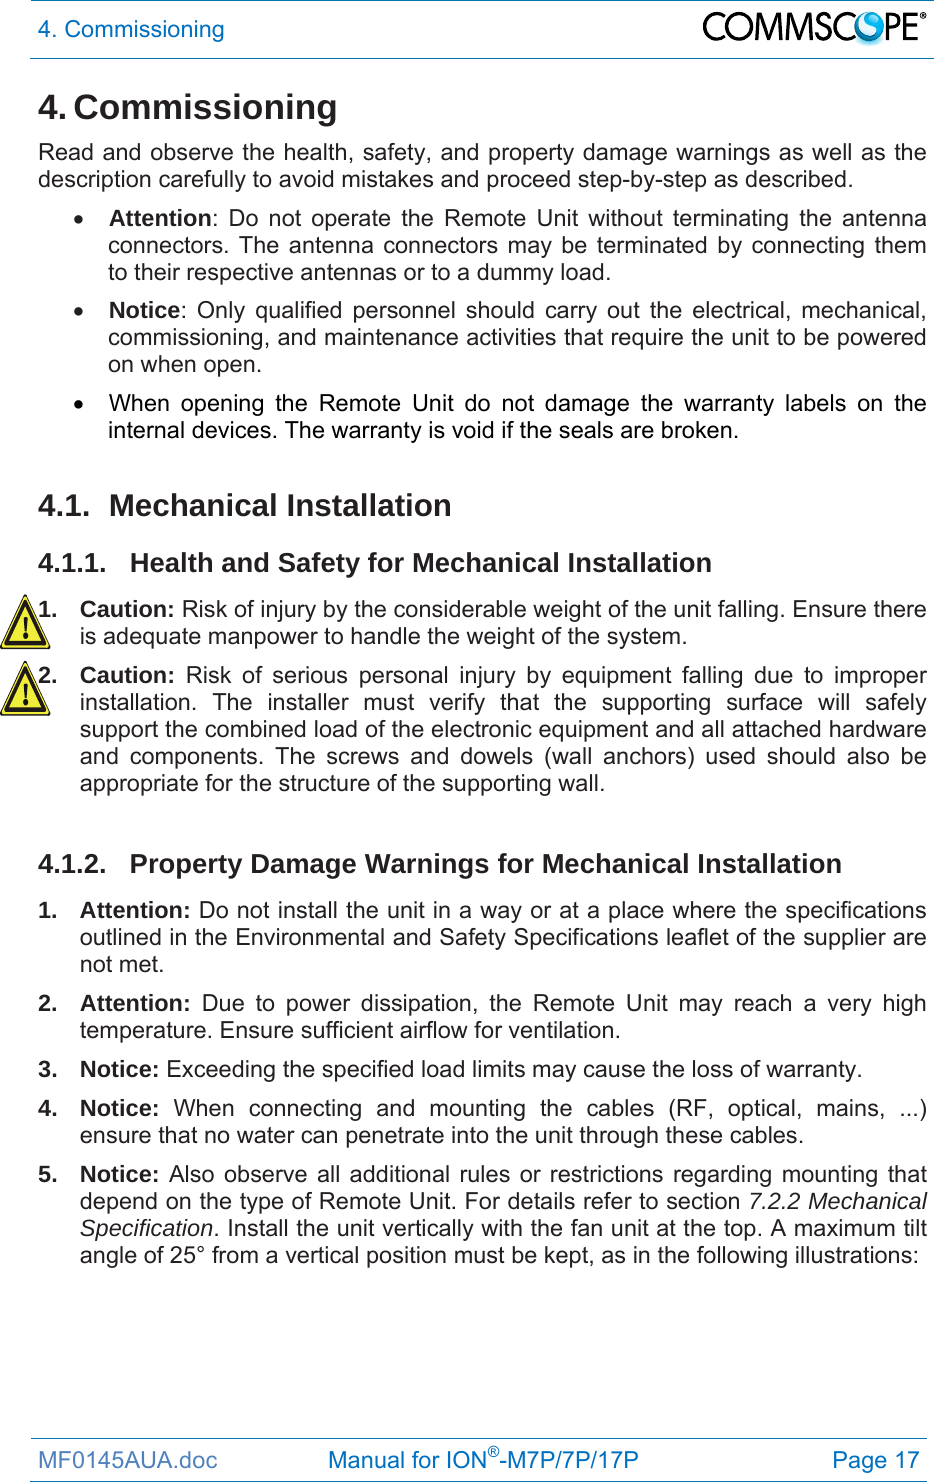 4. Commissioning  MF0145AUA.doc                 Manual for ION®-M7P/7P/17P Page 17 4. Commissioning Read and observe the health, safety, and property damage warnings as well as the description carefully to avoid mistakes and proceed step-by-step as described.  Attention: Do not operate the Remote Unit without terminating the antenna connectors. The antenna connectors may be terminated by connecting them to their respective antennas or to a dummy load.  Notice: Only qualified personnel should carry out the electrical, mechanical, commissioning, and maintenance activities that require the unit to be powered on when open.    When opening the Remote Unit do not damage the warranty labels on the internal devices. The warranty is void if the seals are broken.  4.1. Mechanical Installation 4.1.1. Health and Safety for Mechanical Installation 1. Caution: Risk of injury by the considerable weight of the unit falling. Ensure there is adequate manpower to handle the weight of the system. 2. Caution: Risk of serious personal injury by equipment falling due to improper installation. The installer must verify that the supporting surface will safely support the combined load of the electronic equipment and all attached hardware and components. The screws and dowels (wall anchors) used should also be appropriate for the structure of the supporting wall.  4.1.2.  Property Damage Warnings for Mechanical Installation 1. Attention: Do not install the unit in a way or at a place where the specifications outlined in the Environmental and Safety Specifications leaflet of the supplier are not met. 2. Attention: Due to power dissipation, the Remote Unit may reach a very high temperature. Ensure sufficient airflow for ventilation. 3. Notice: Exceeding the specified load limits may cause the loss of warranty. 4. Notice: When connecting and mounting the cables (RF, optical, mains, ...) ensure that no water can penetrate into the unit through these cables. 5. Notice: Also observe all additional rules or restrictions regarding mounting that depend on the type of Remote Unit. For details refer to section 7.2.2 Mechanical Specification. Install the unit vertically with the fan unit at the top. A maximum tilt angle of 25° from a vertical position must be kept, as in the following illustrations:  